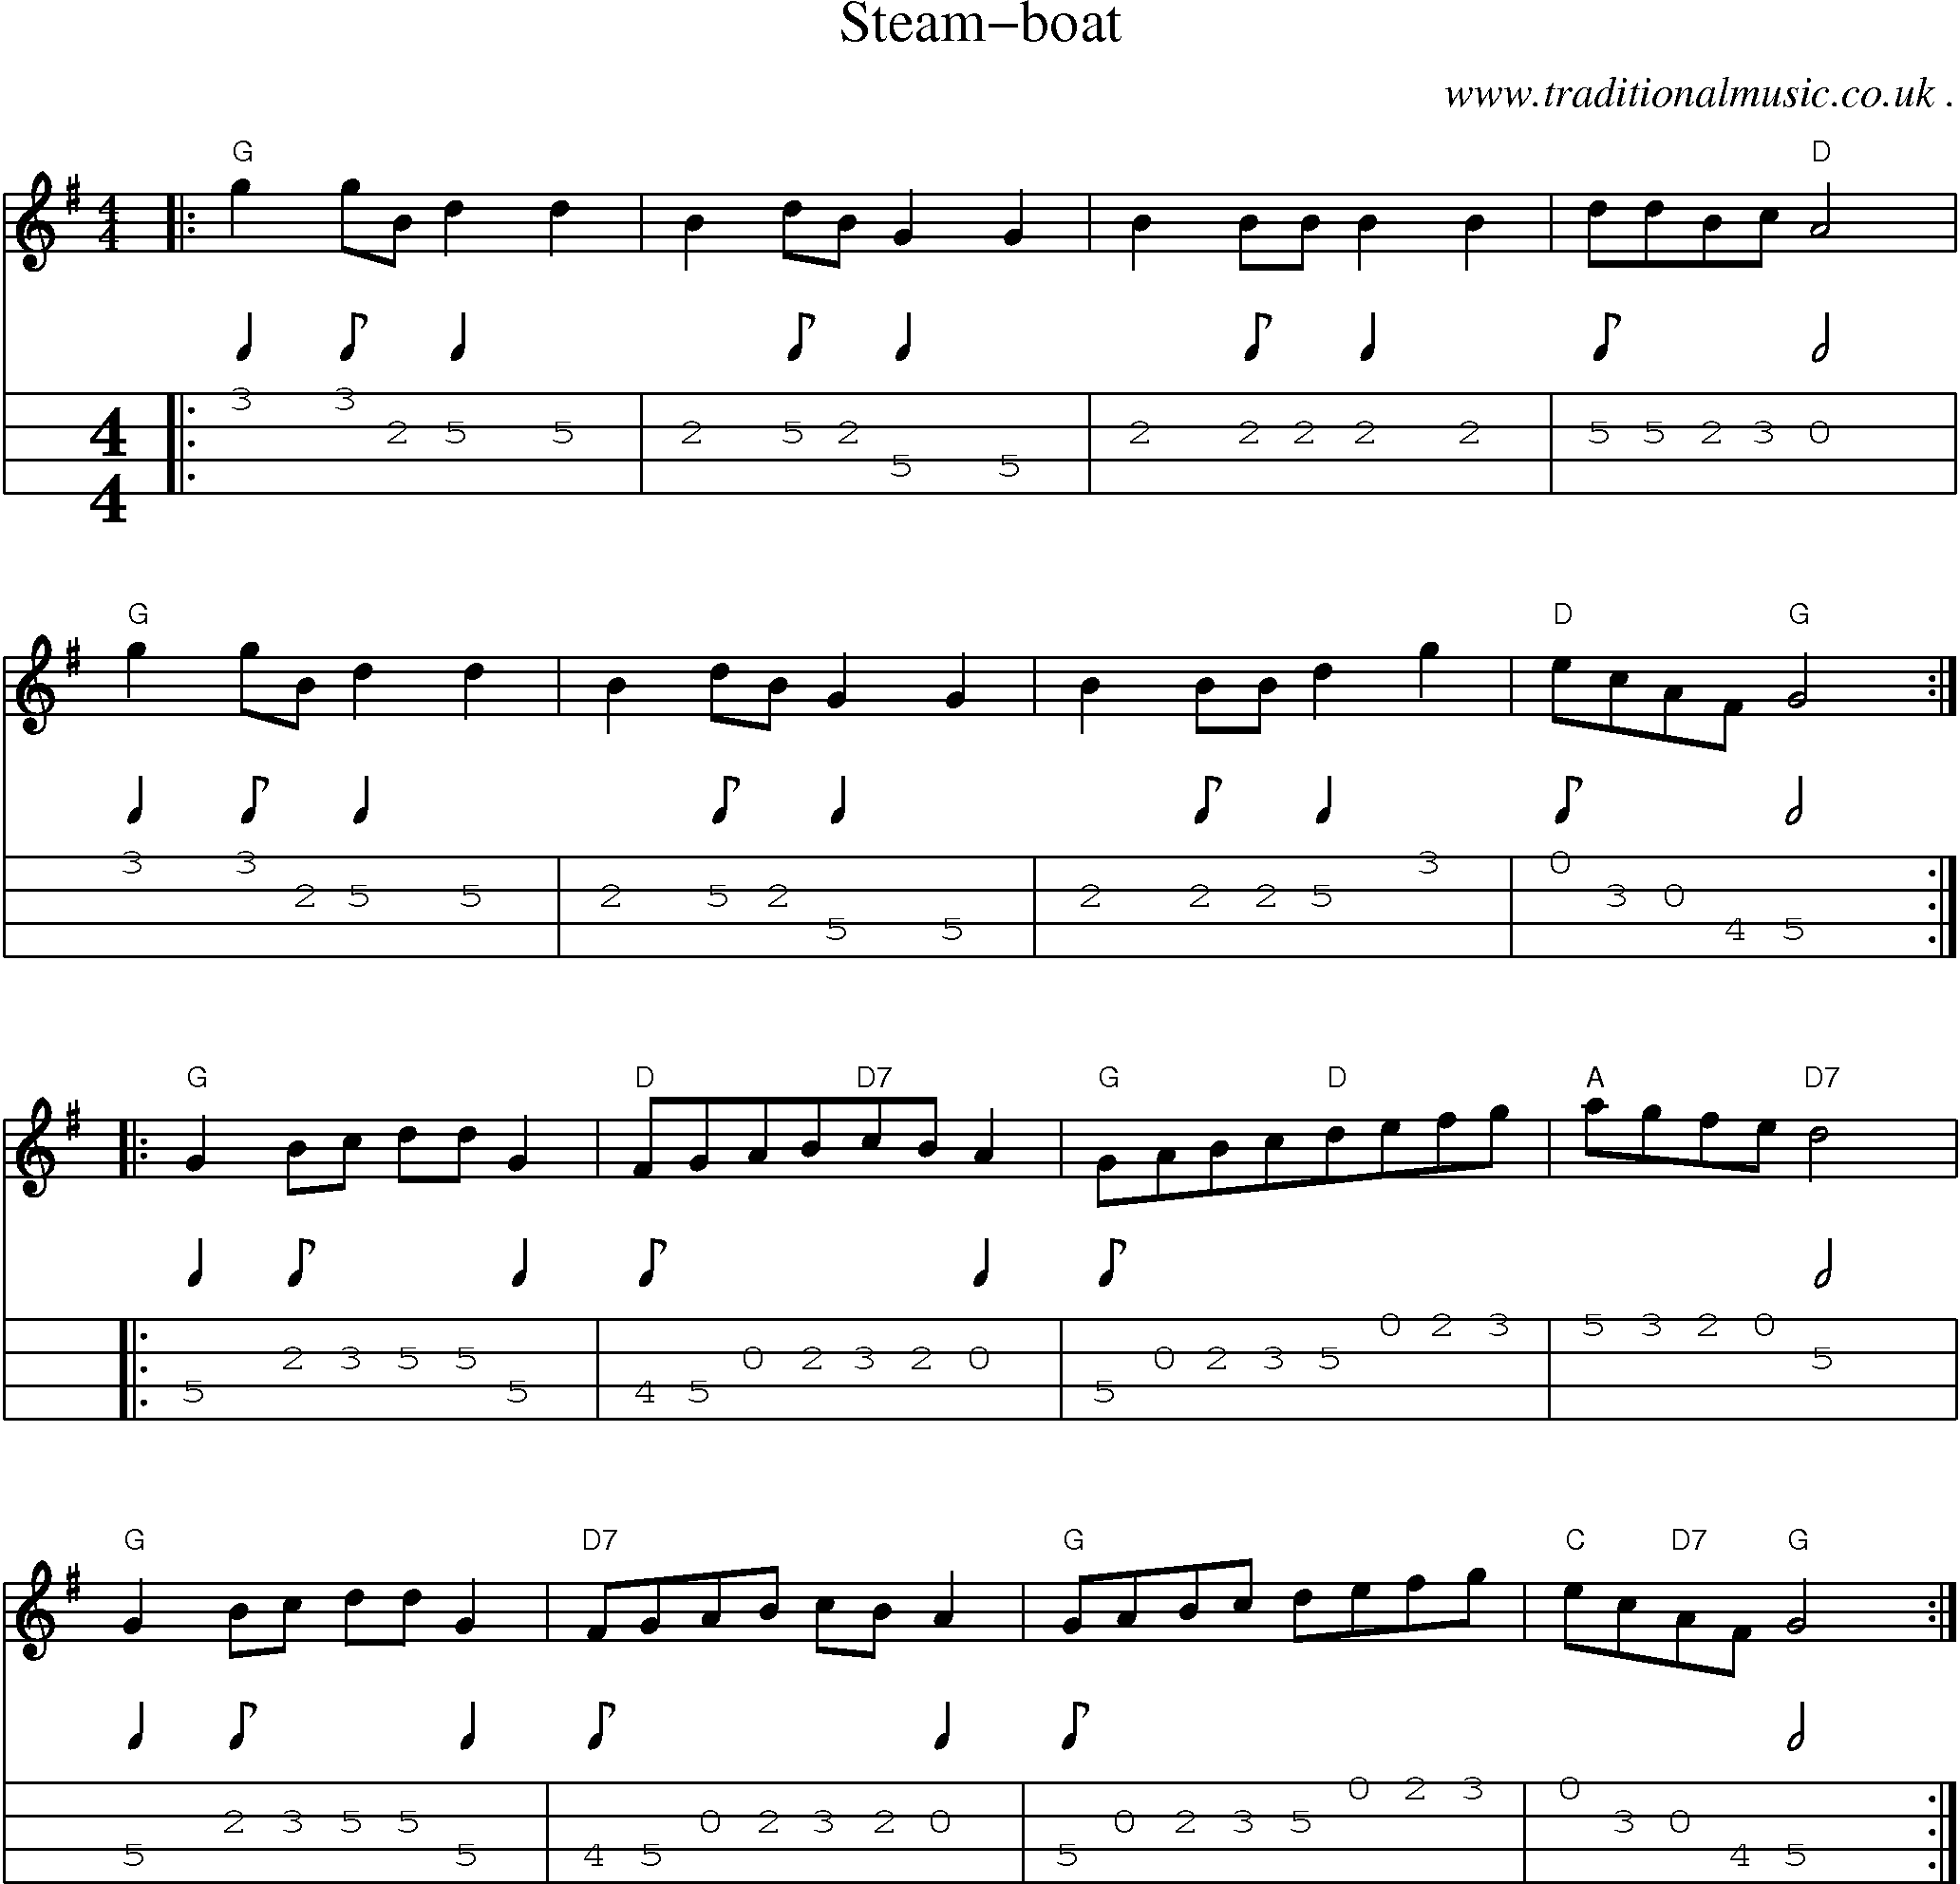 Sheet-Music and Mandolin Tabs for Steam-boat